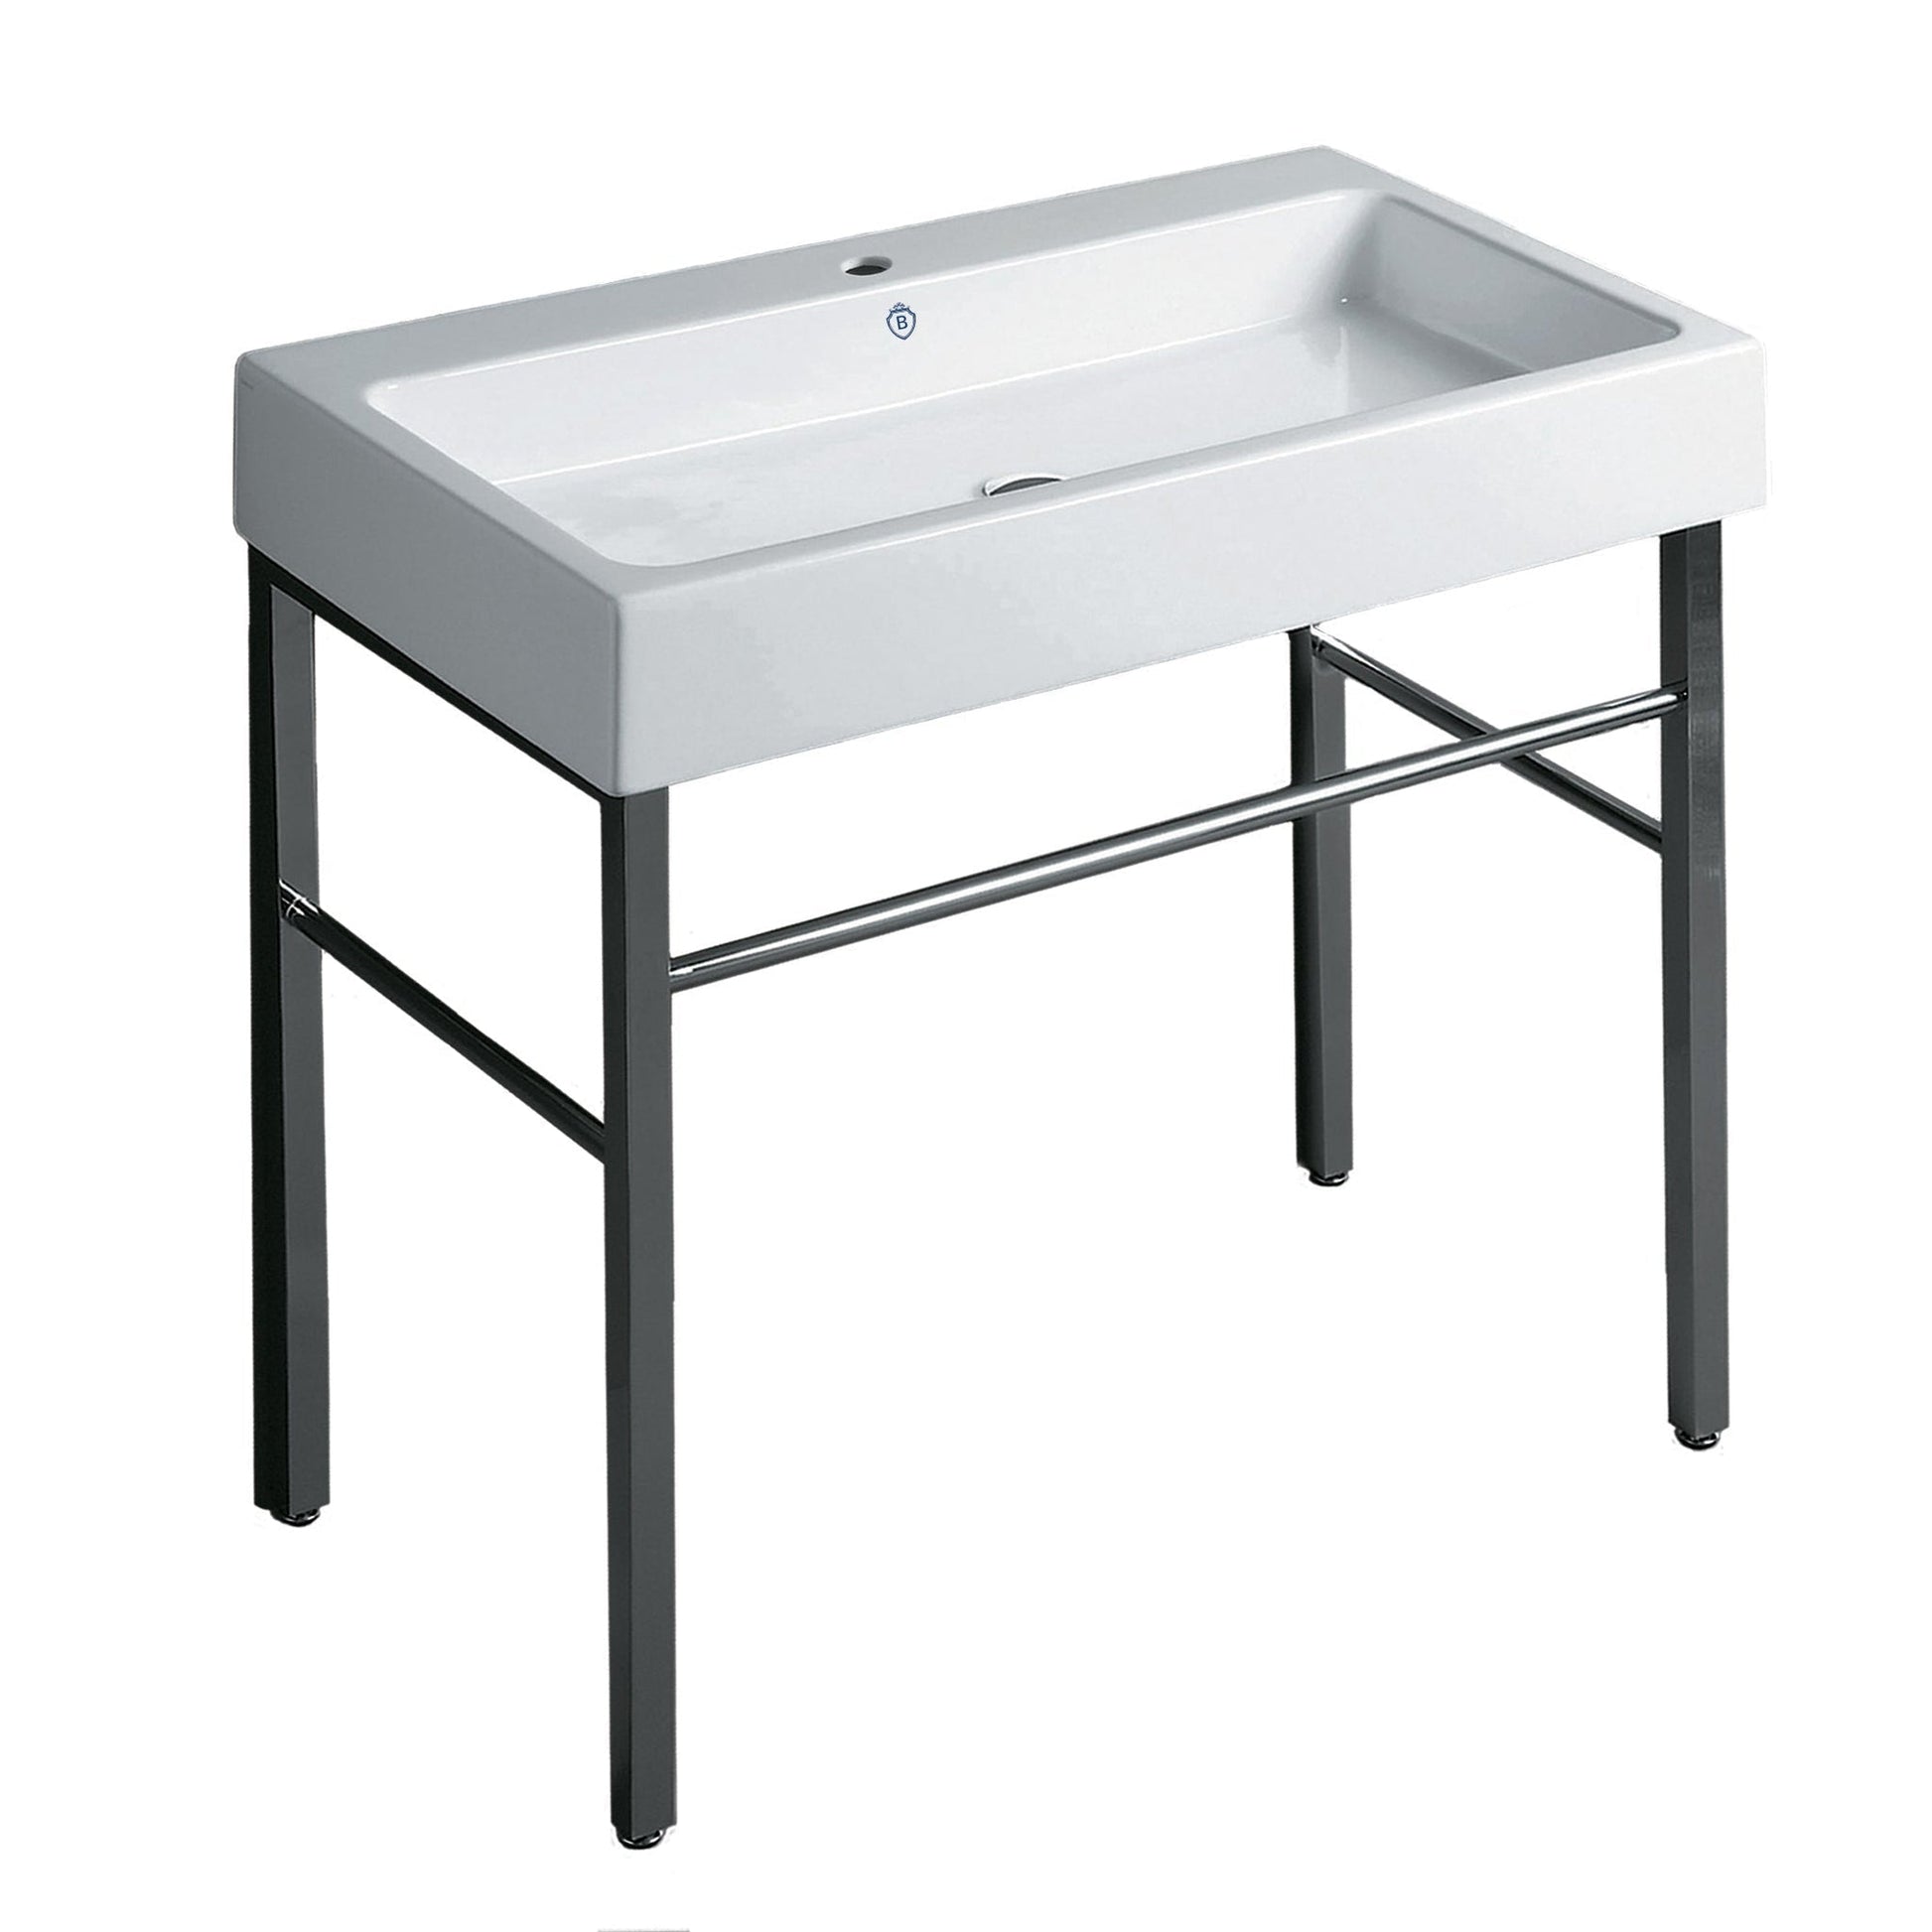 Whitehaus Britannia B-U90-DUCG1-A09-1 White/Chrome Large Rectangular Sink Console With Front Towel Bar and Single Faucet Hole Drill